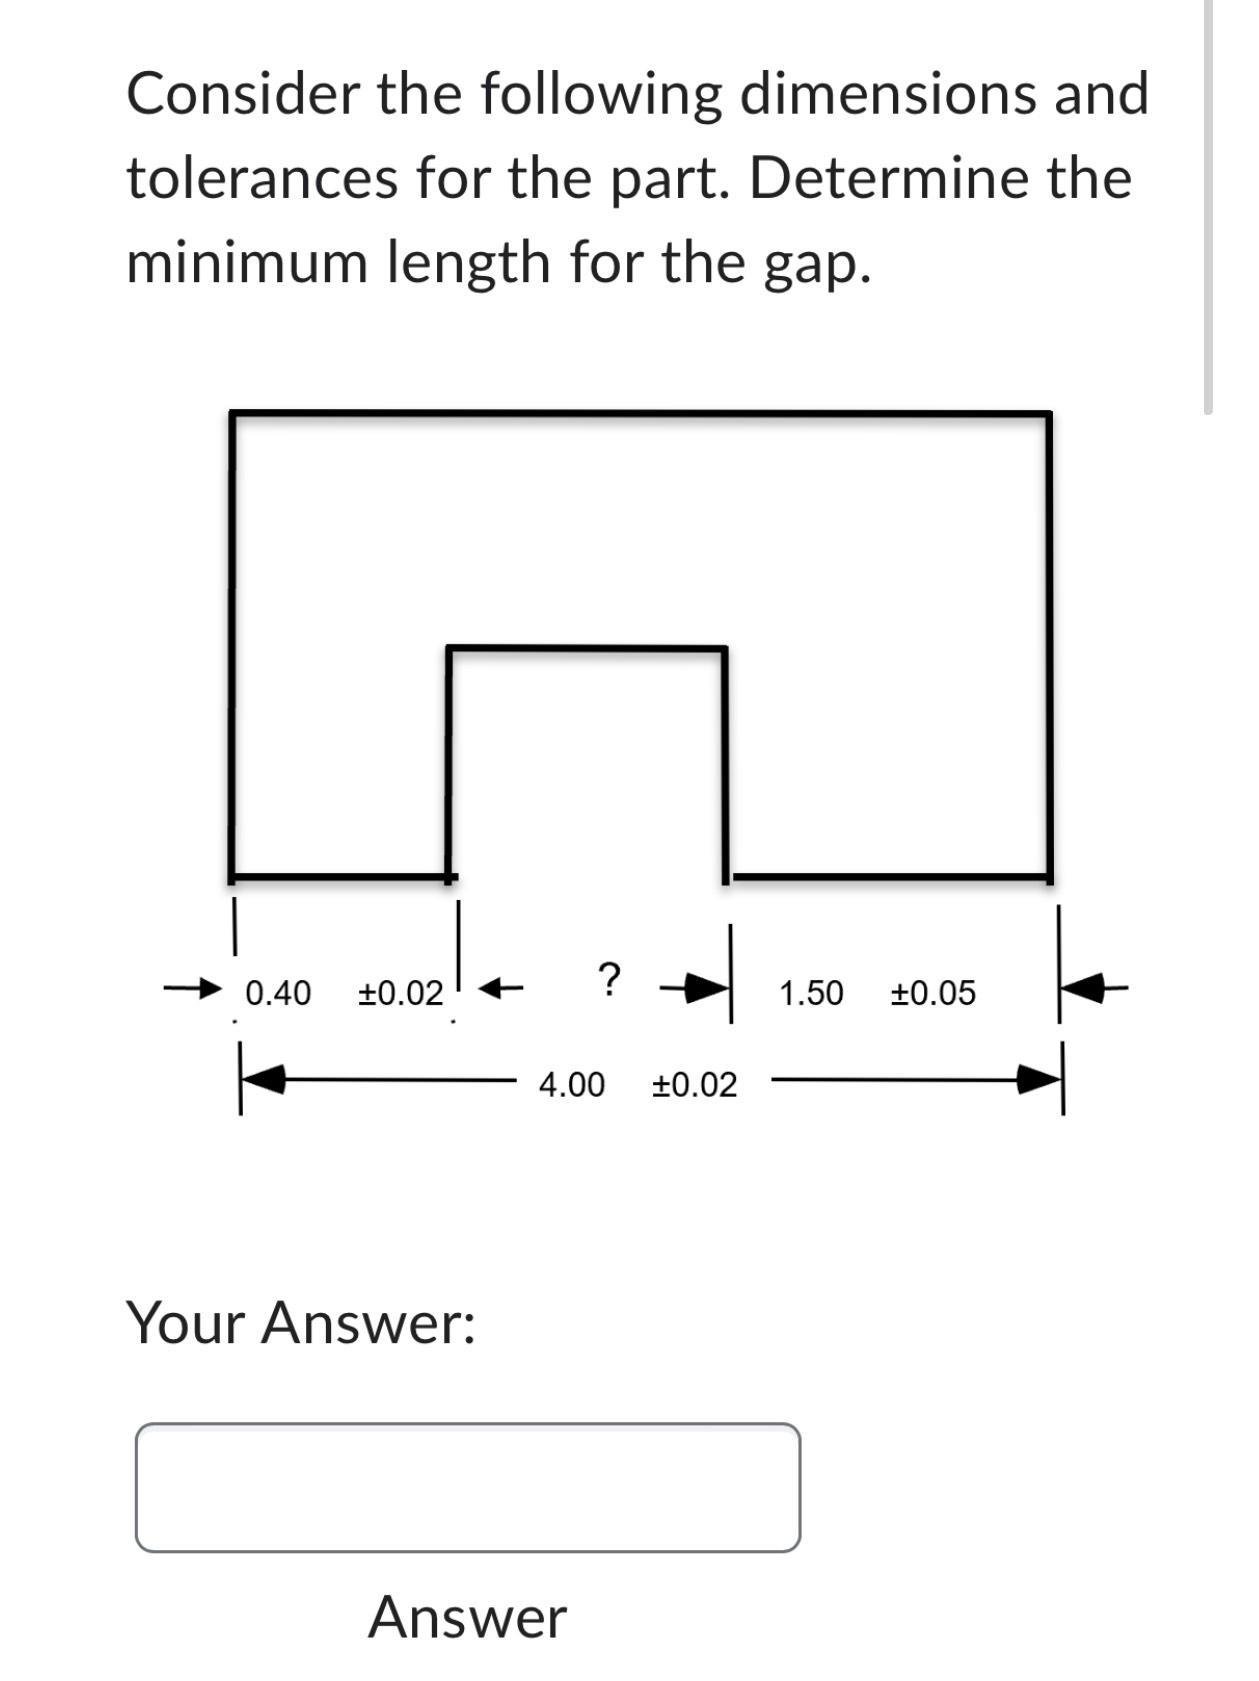 Consider the following dimensions and tolerances for the part. Determine the minimum length for the gap. 0.40